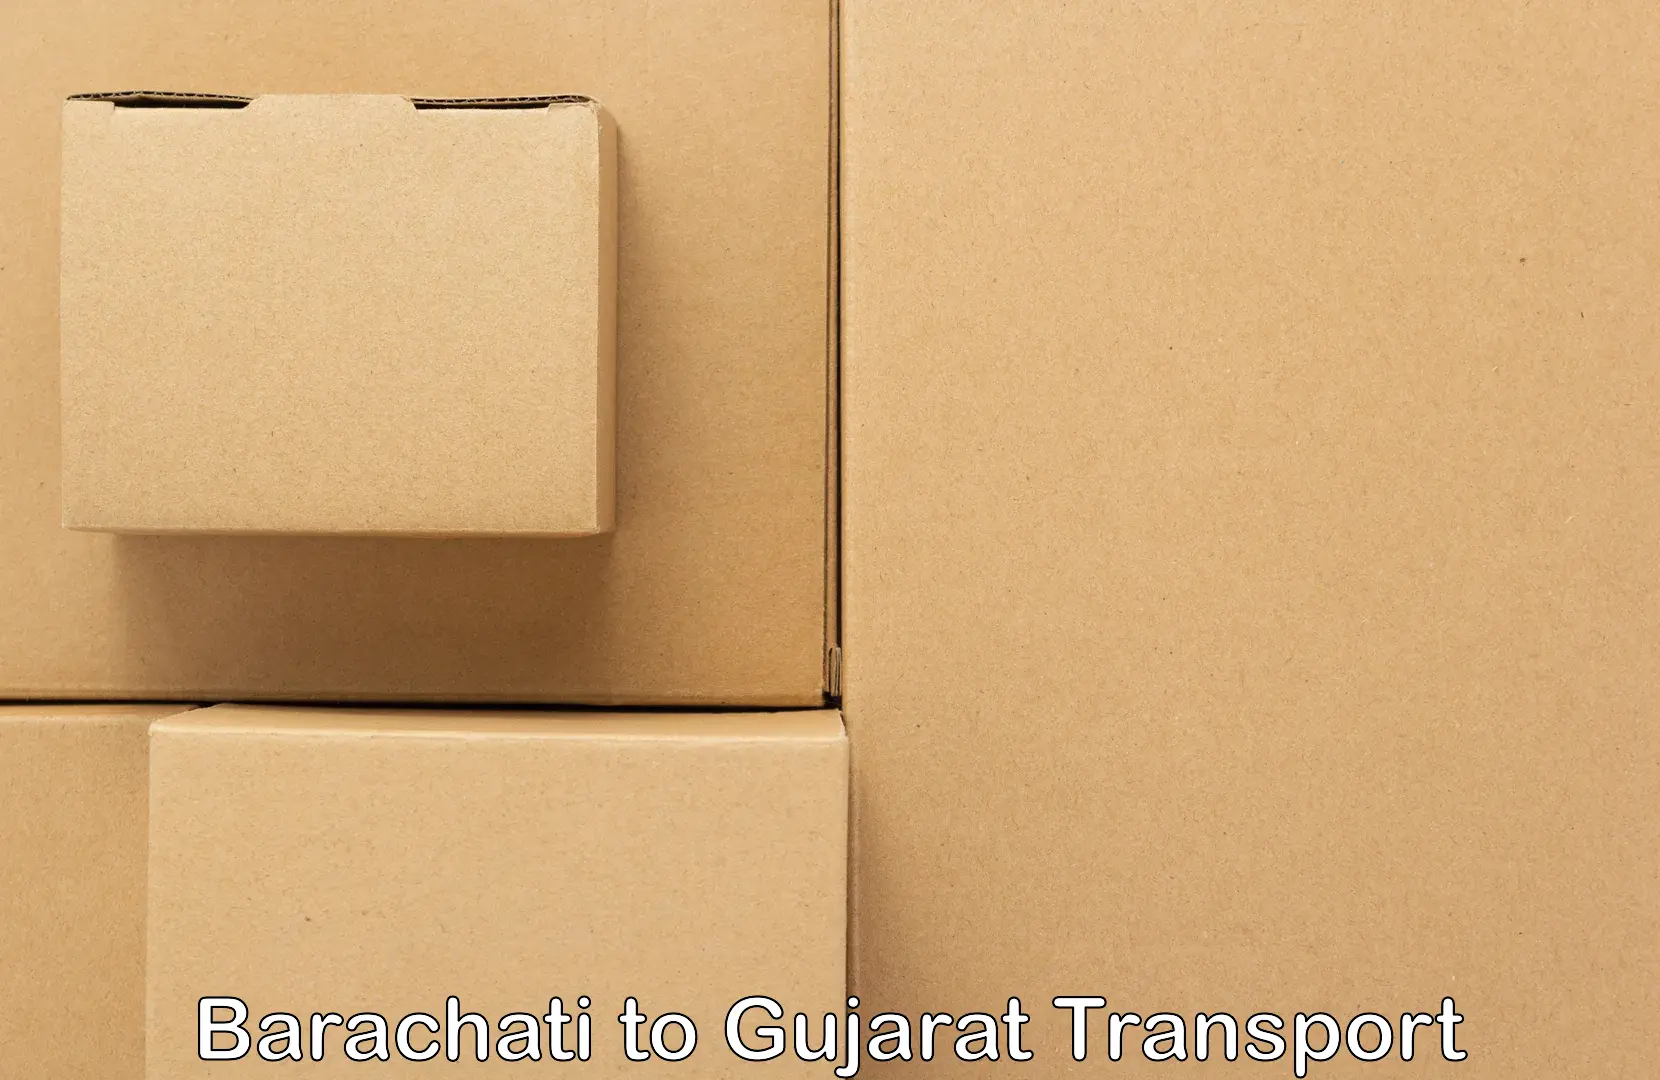 Air freight transport services in Barachati to Upleta